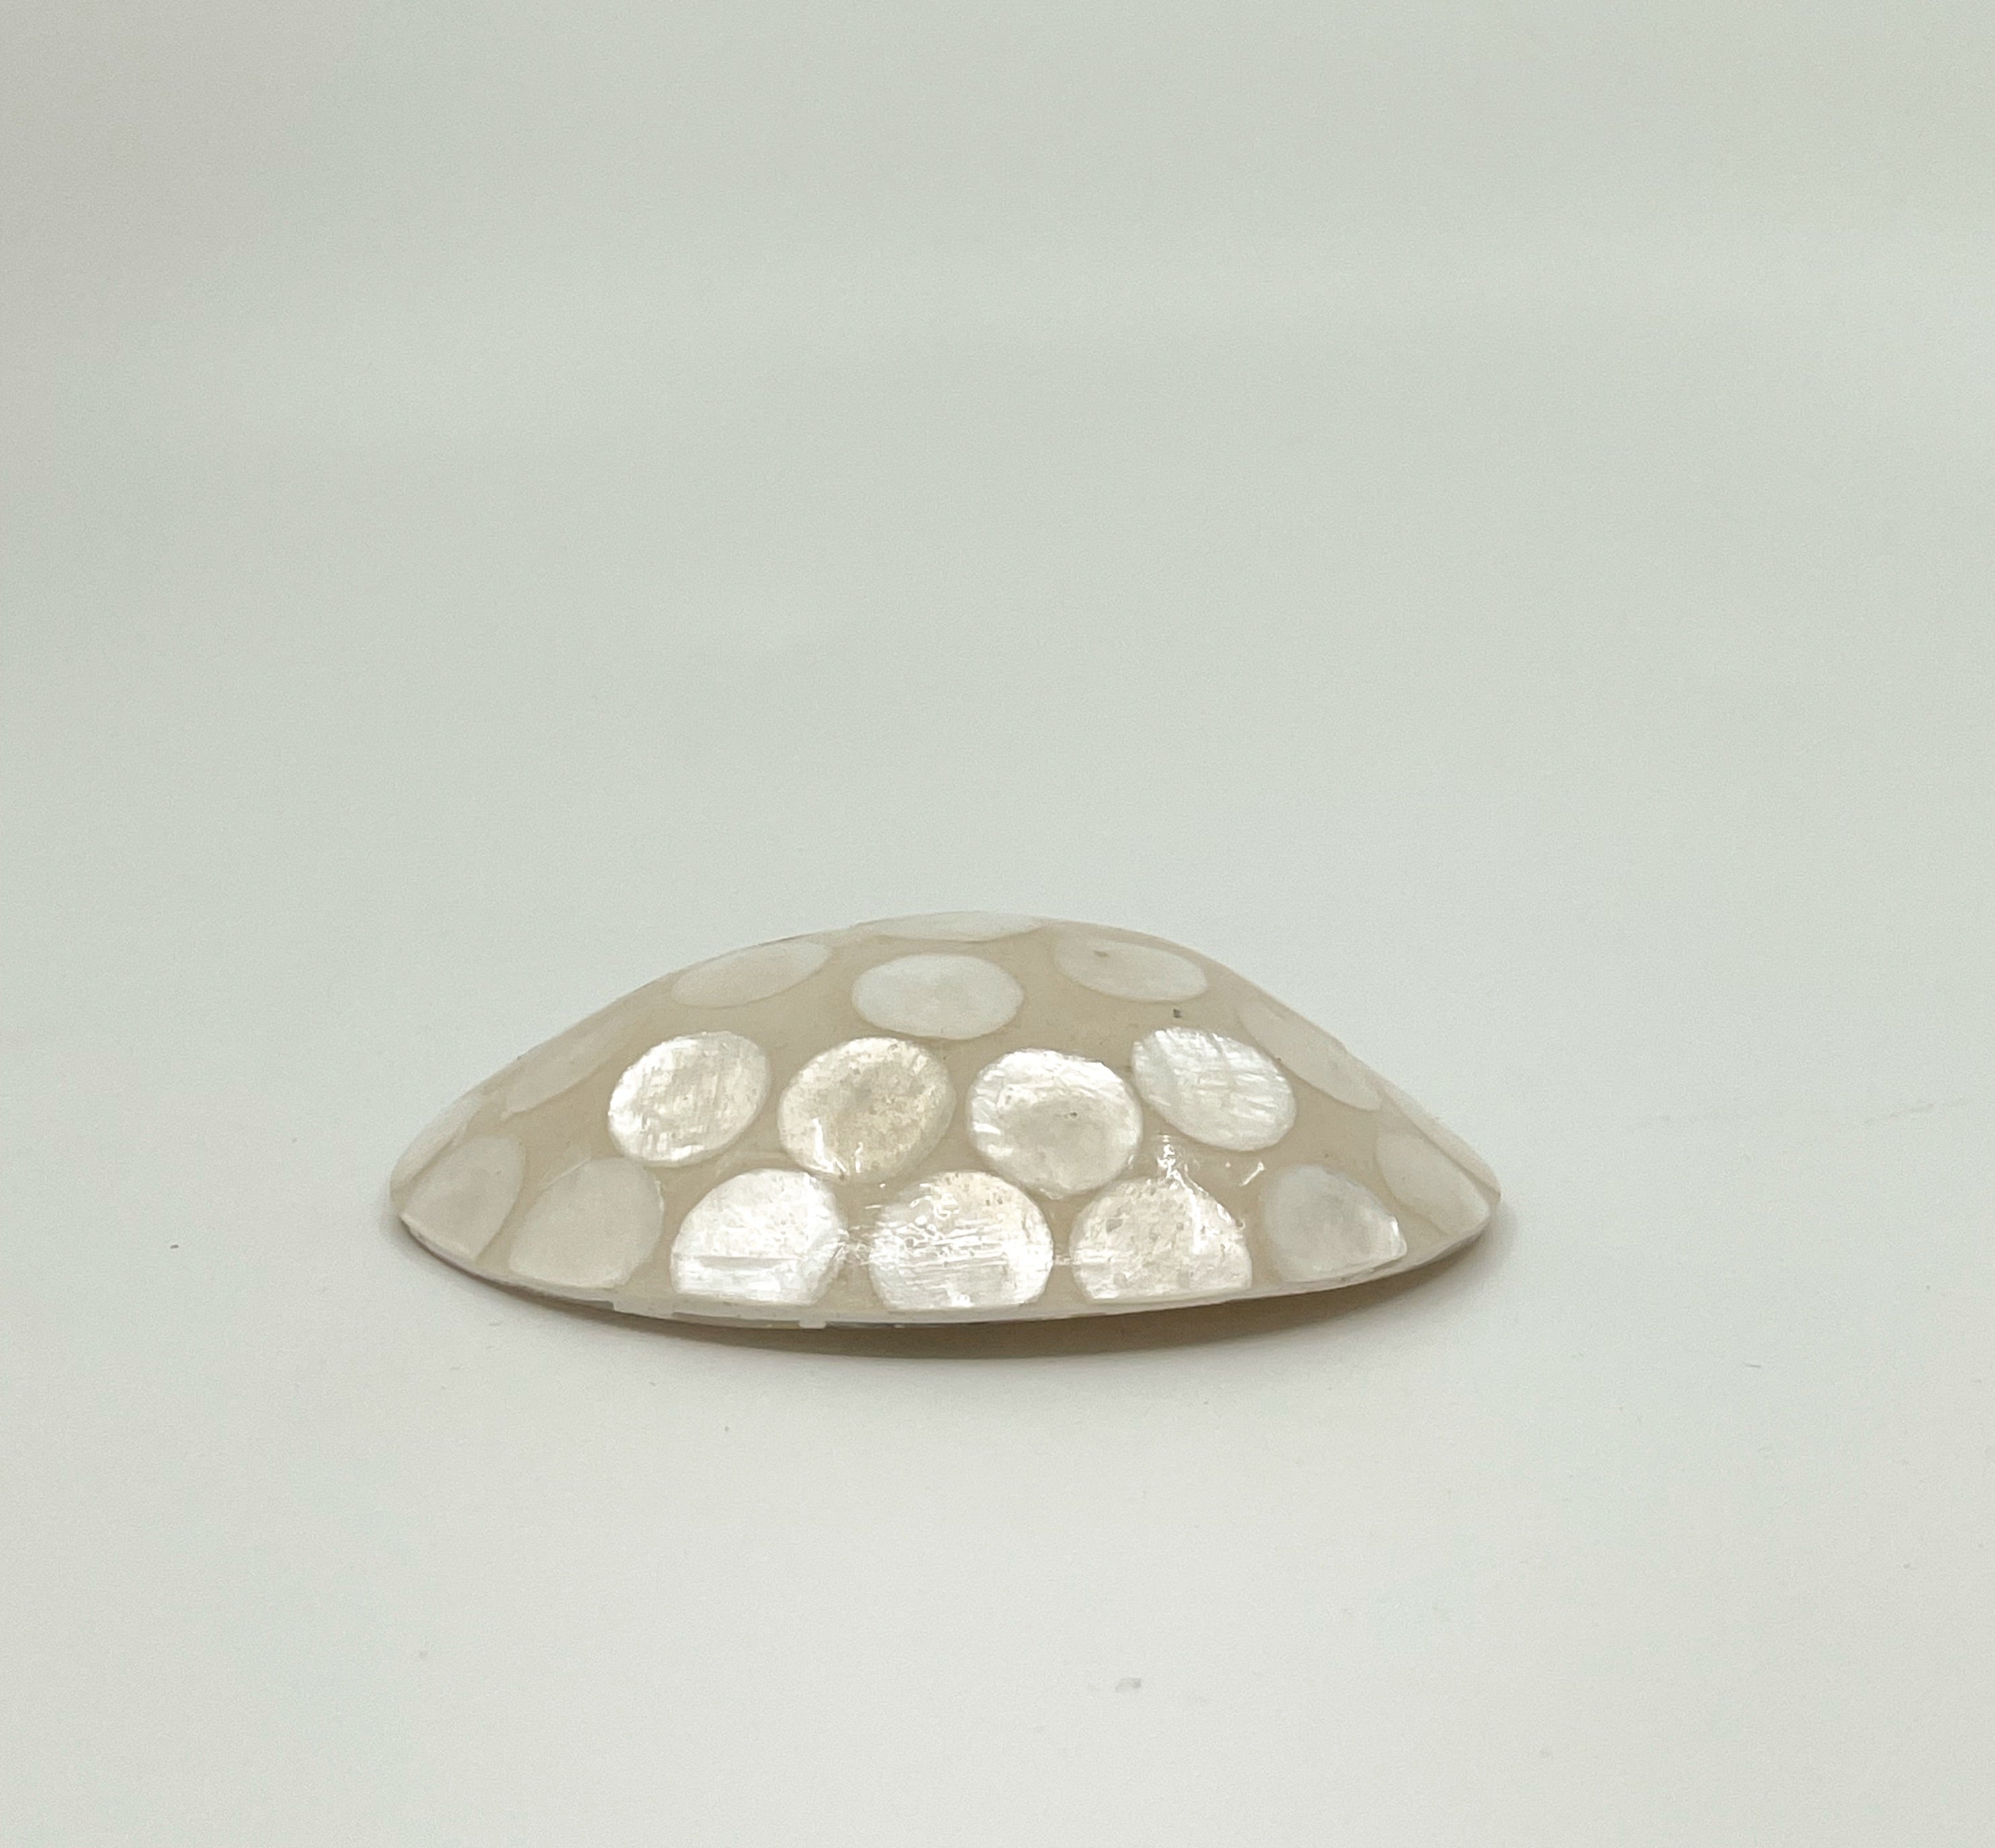 Oval resin bowl with Capiz shells